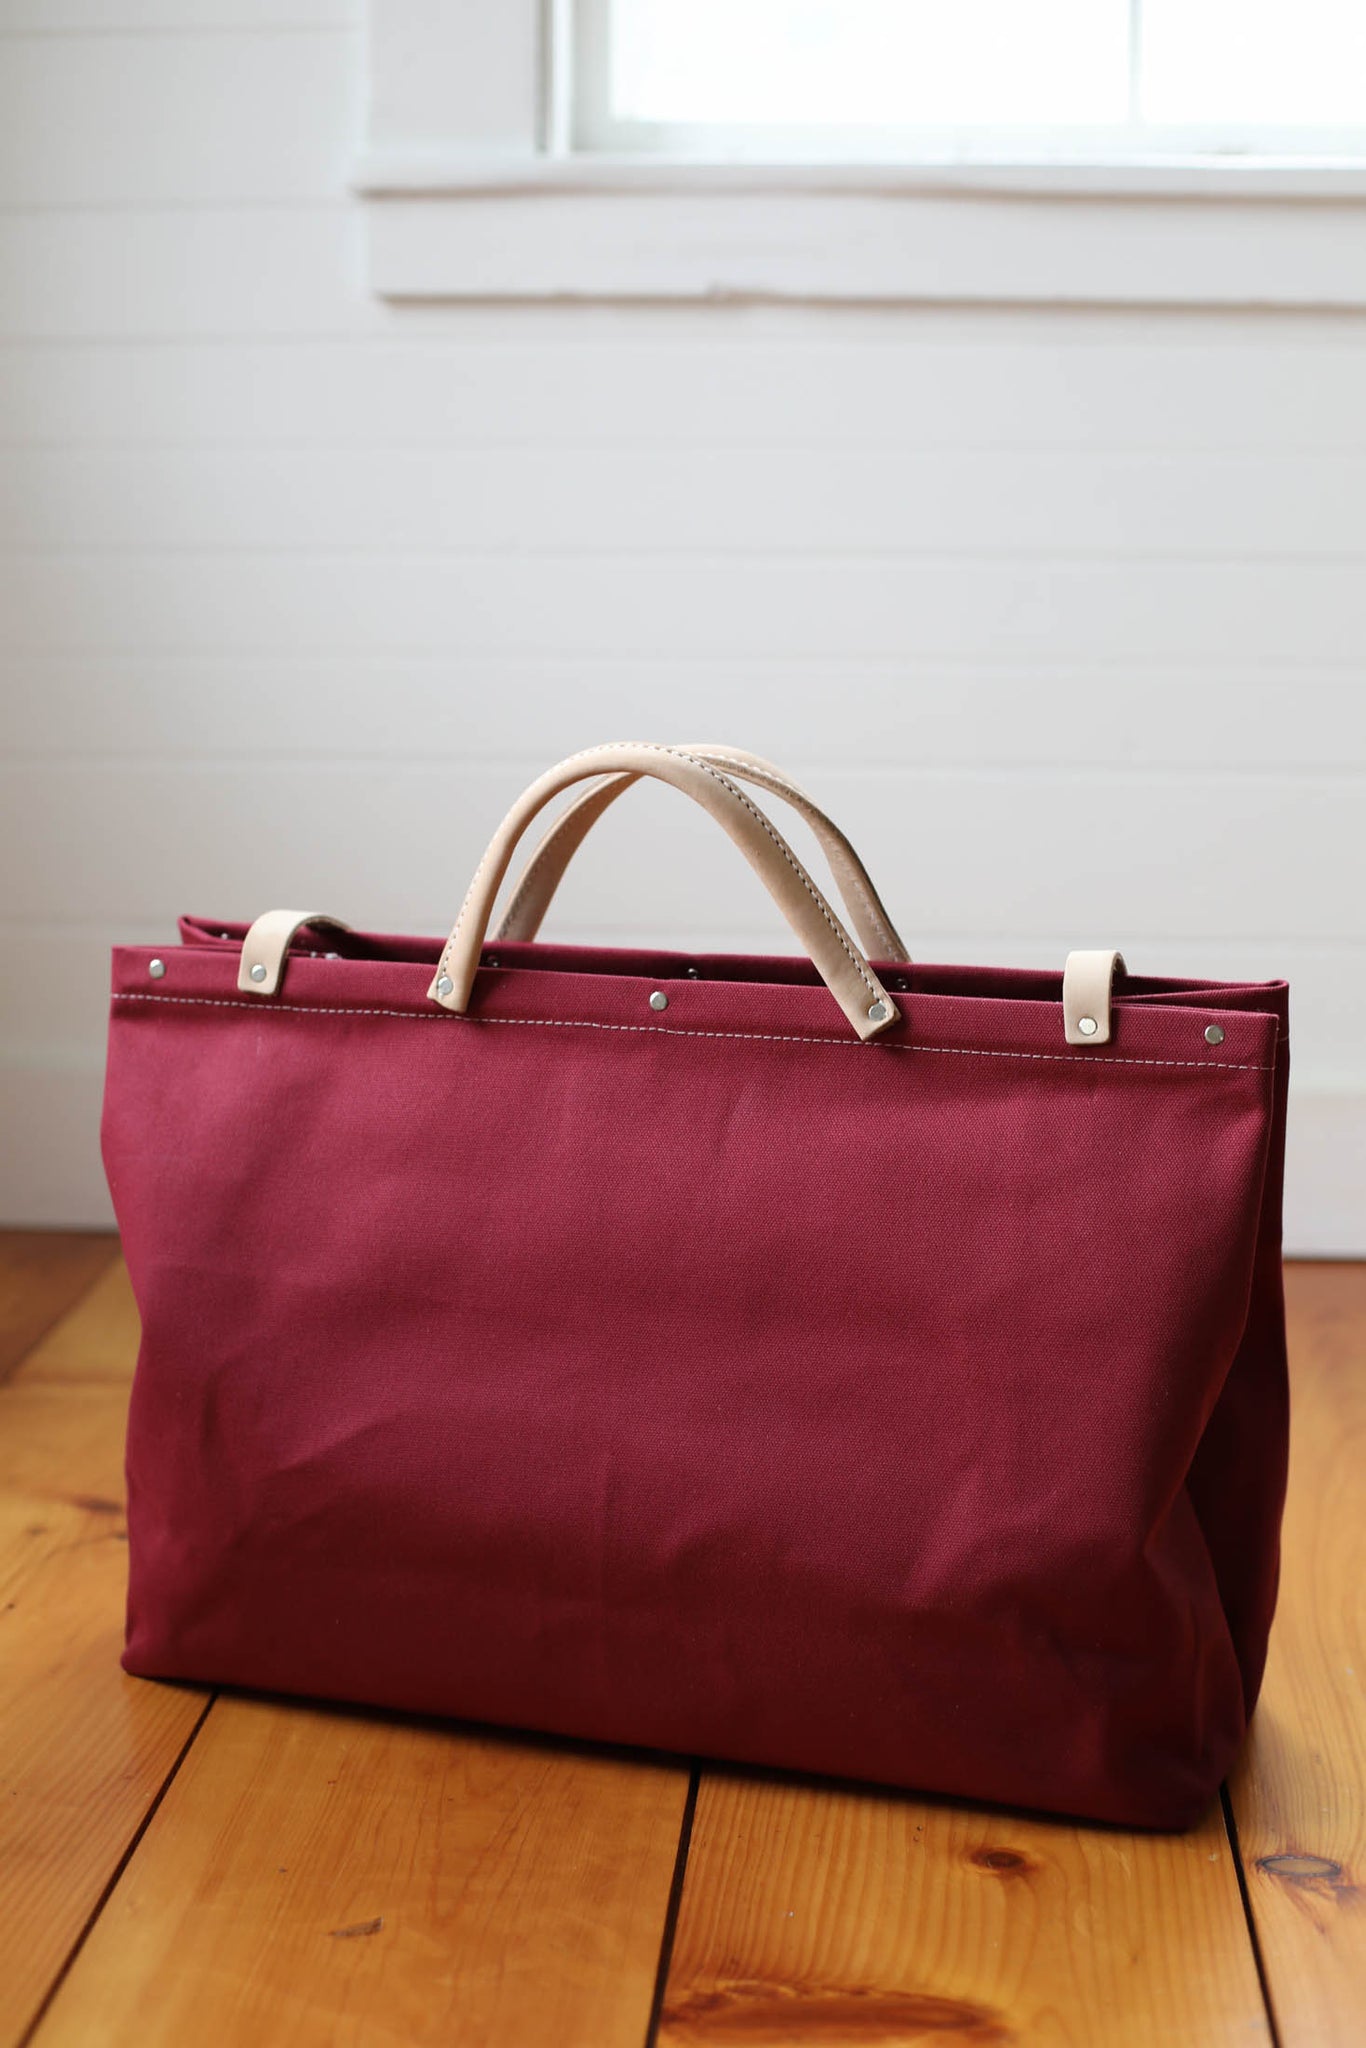 LIMITED EDITION - Forestbound ESCAPE Canvas Utility Bag in Cranberry